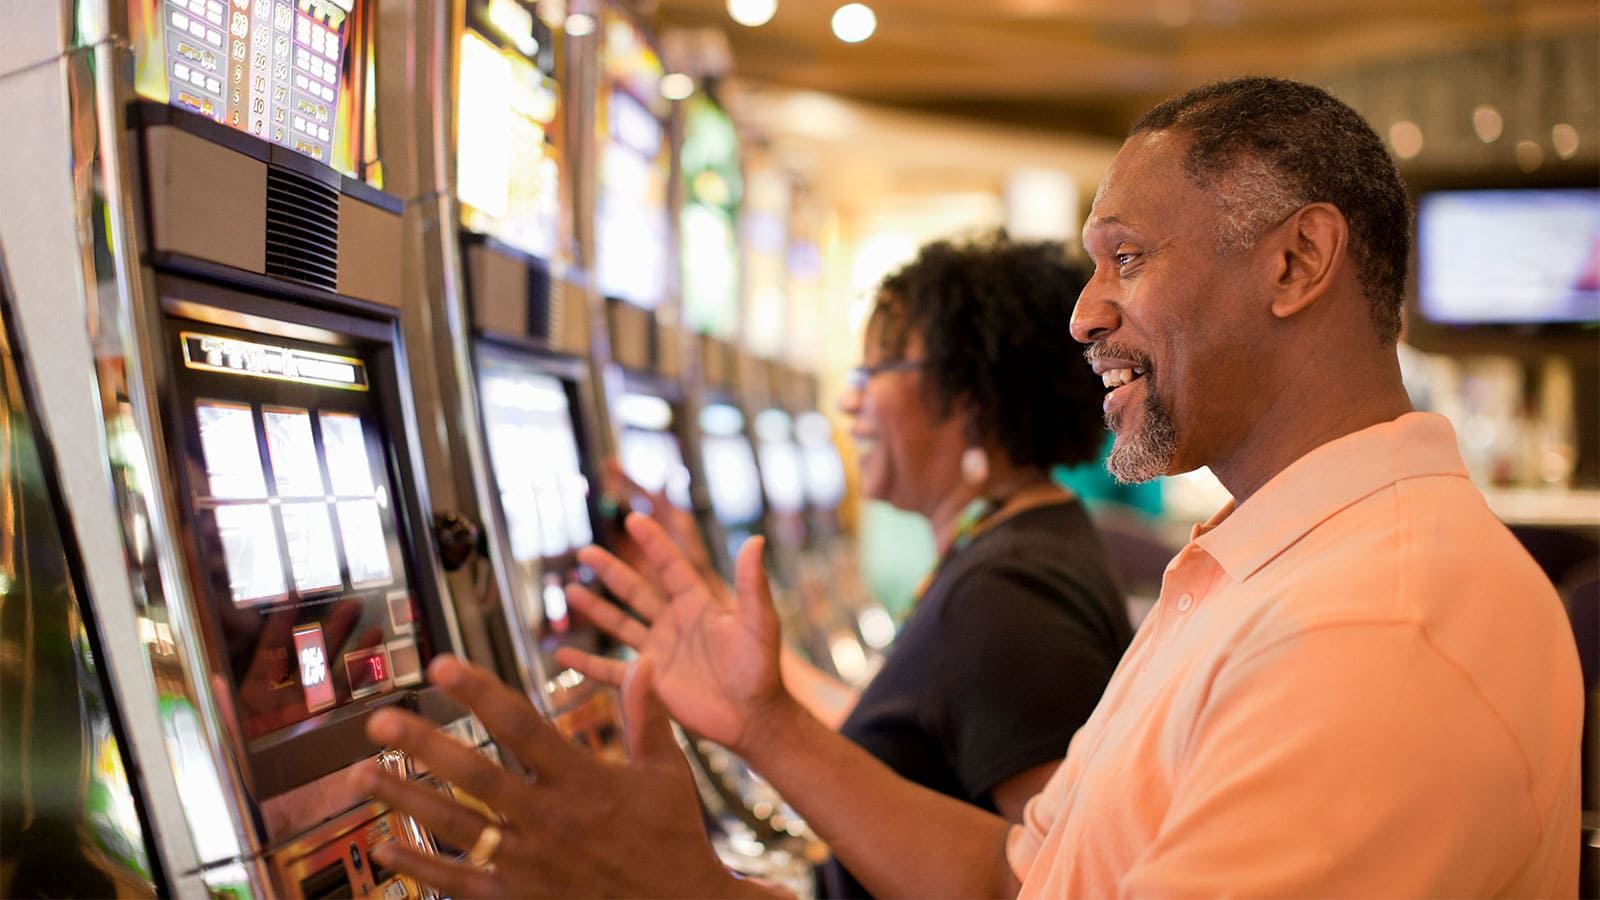 can you really win money playing online slots